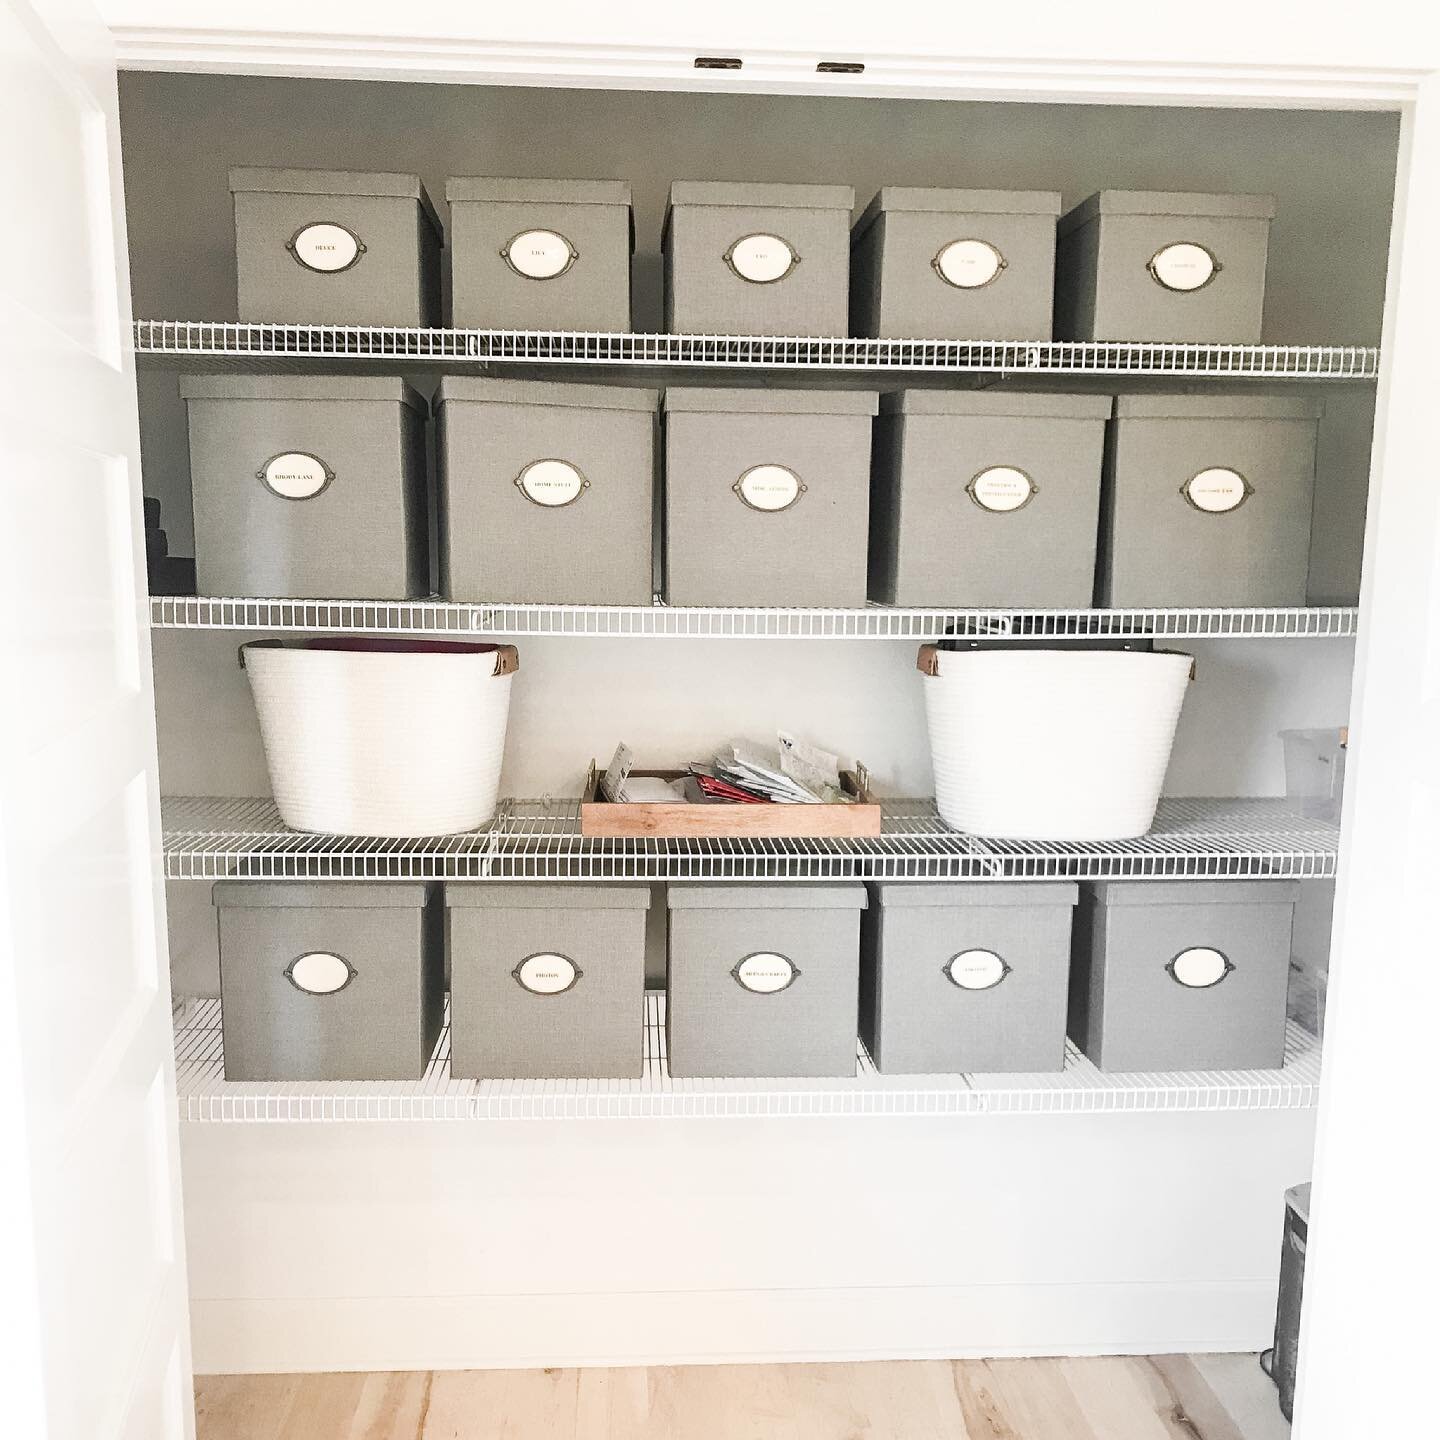 WIRE SHELVING.  Whether in a kitchen pantry, closet, or home office (like this one), wire shelves can be tricky for storage.  A few solutions to help keep items from falling through the cracks include storage bins, trays, and shelf mats.
⠀⠀⠀⠀⠀⠀⠀⠀⠀
Do